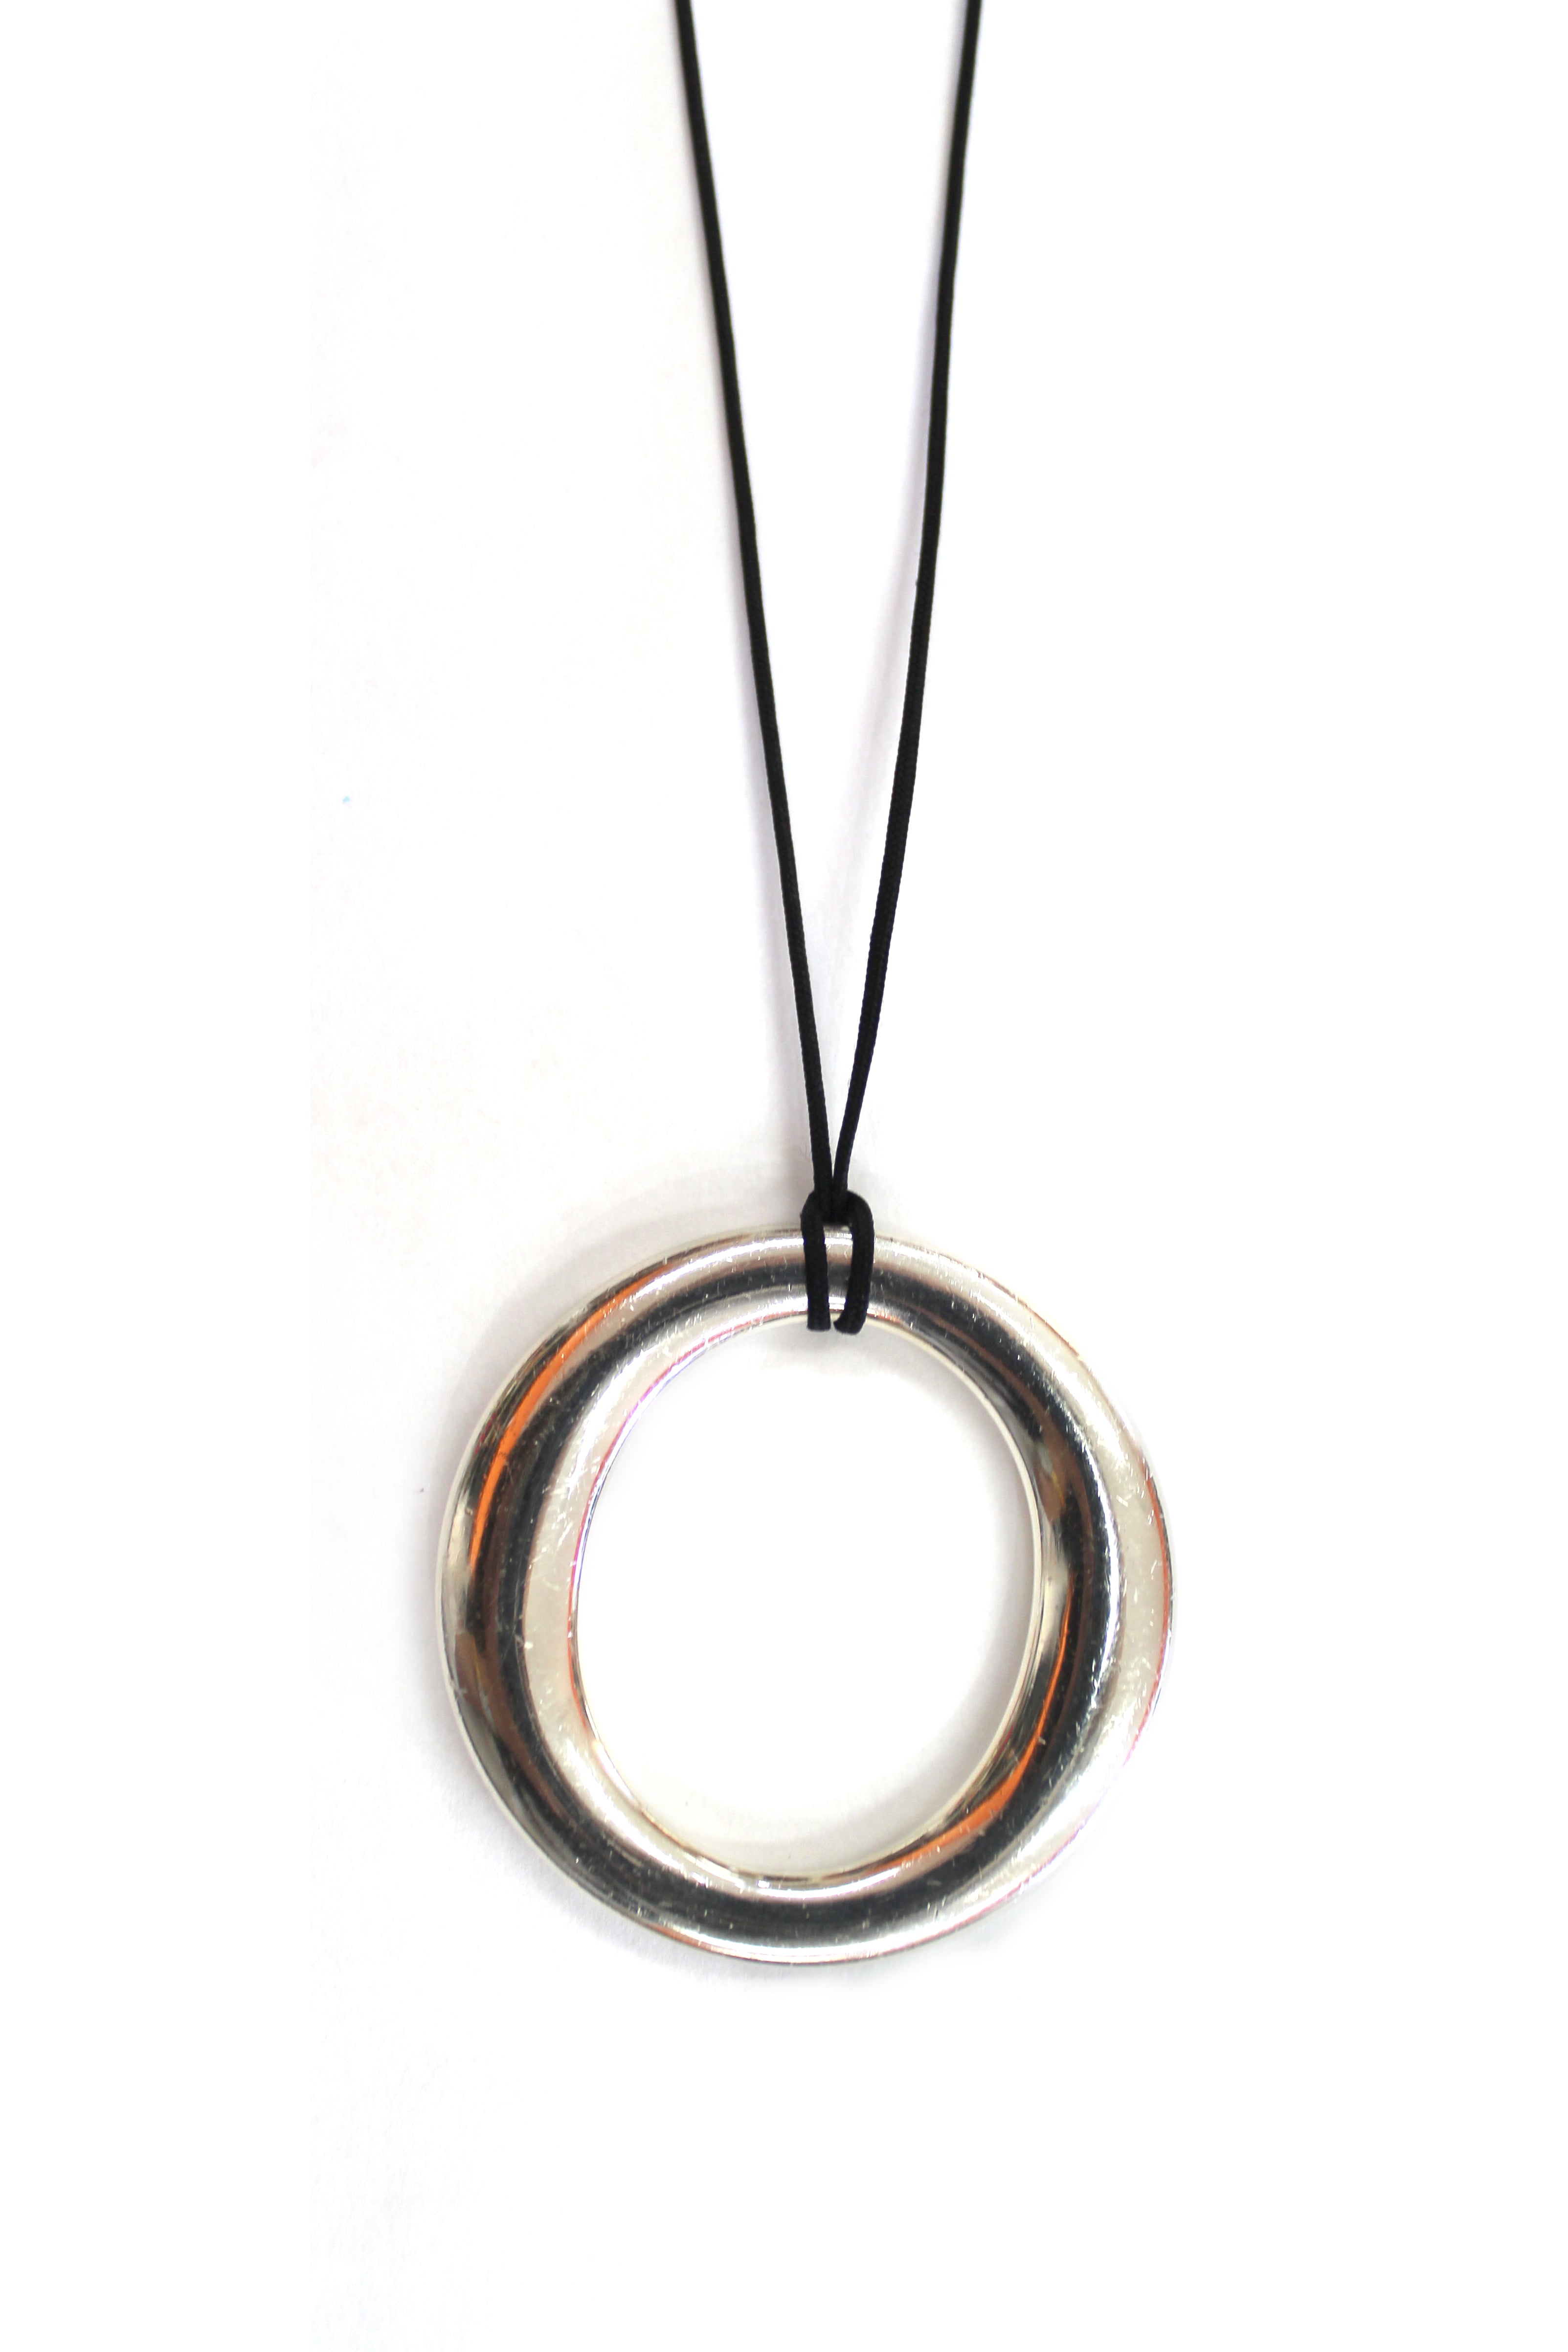 Authentic Tiffany & Co. Sterling Silver Elsa Peretti Sevillana Large Circle Pendant with Cord Necklace